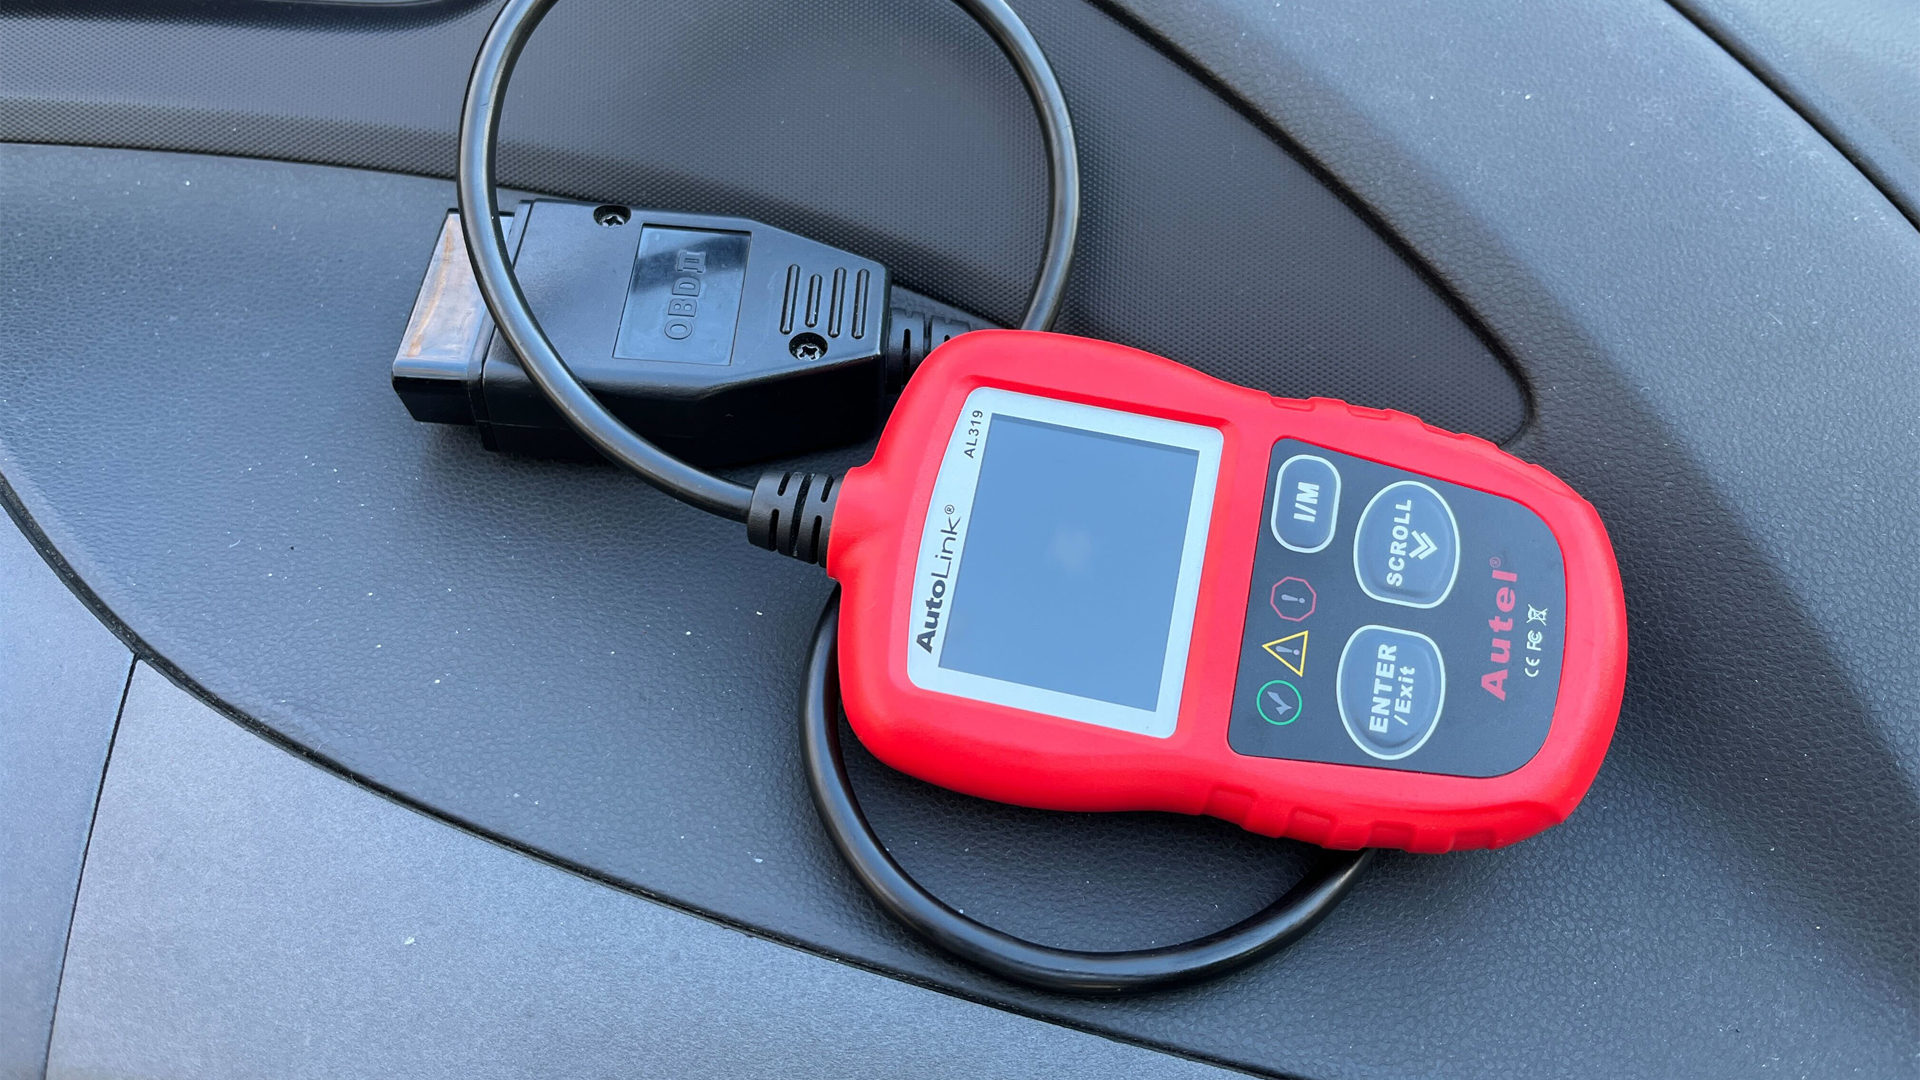 How To Use An OBD2 Scanner? (Also How To Find The OBD Port In Any